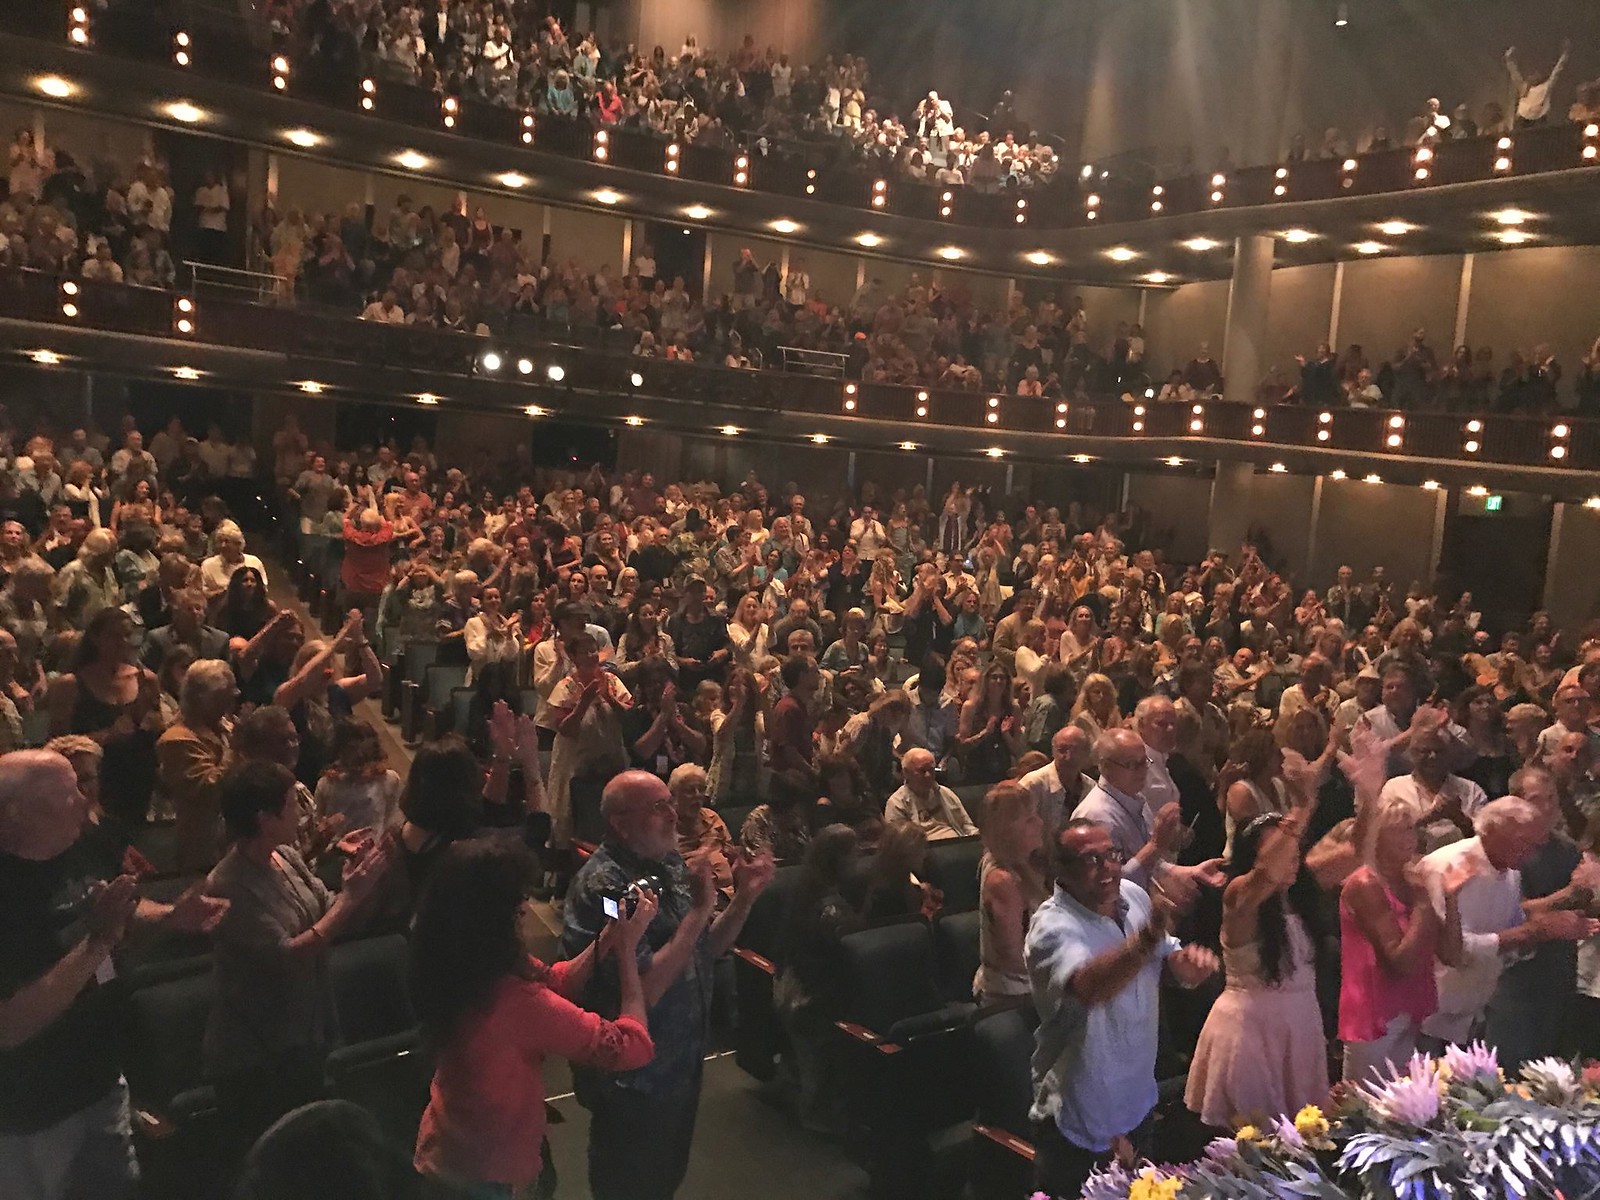 A sold-out crowd at the Maui Arts and Cultural Center honors Ram Dass with a standing ovation.